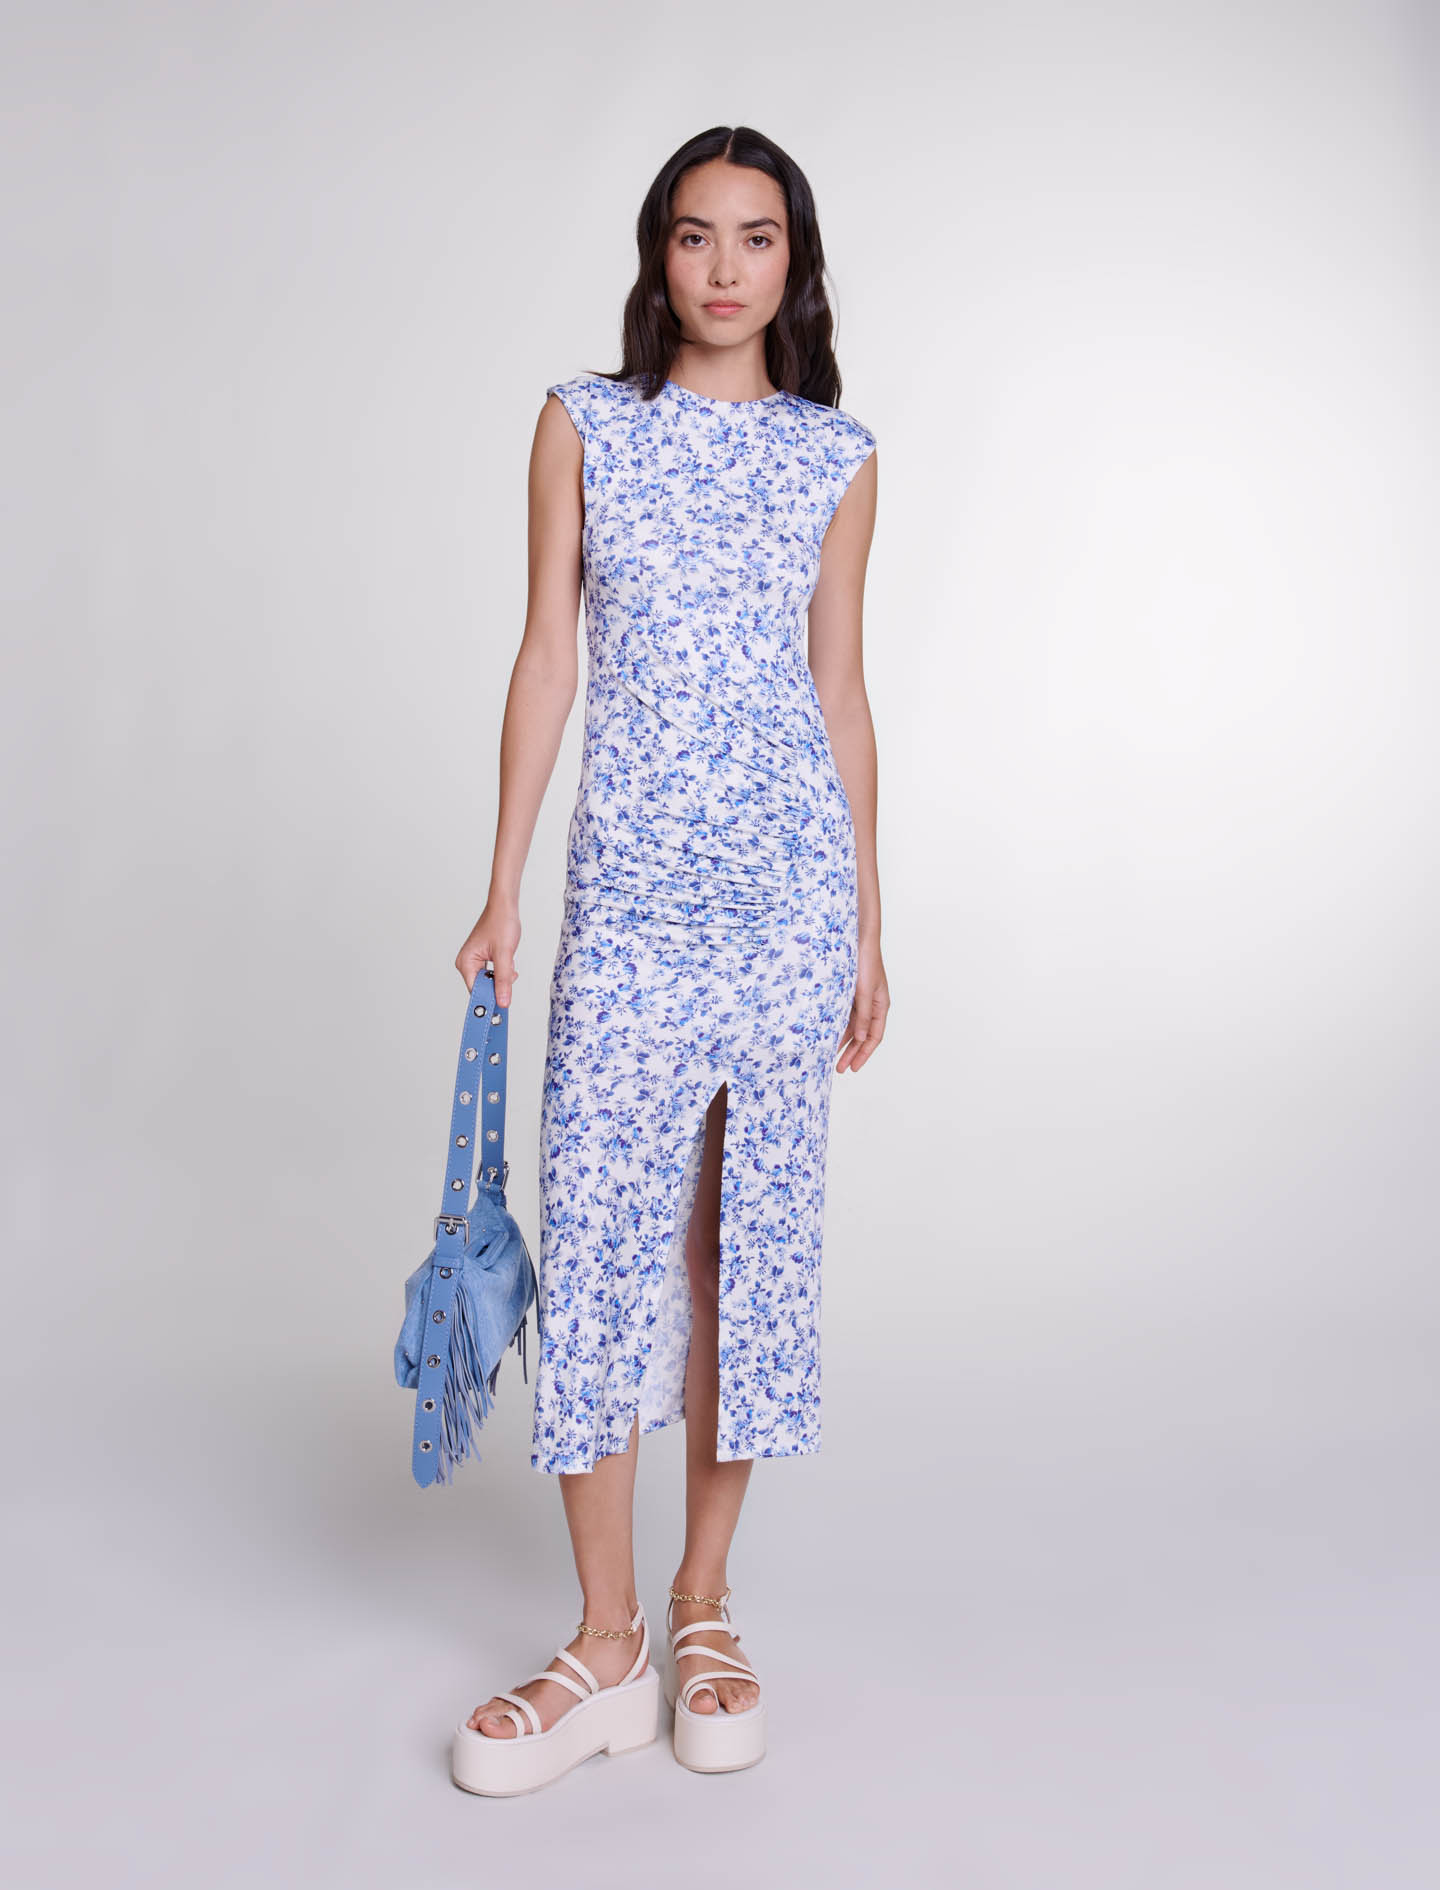 Maje Woman's polyester, Patterned maxi dress for Spring/Summer, in color small blue flower print /